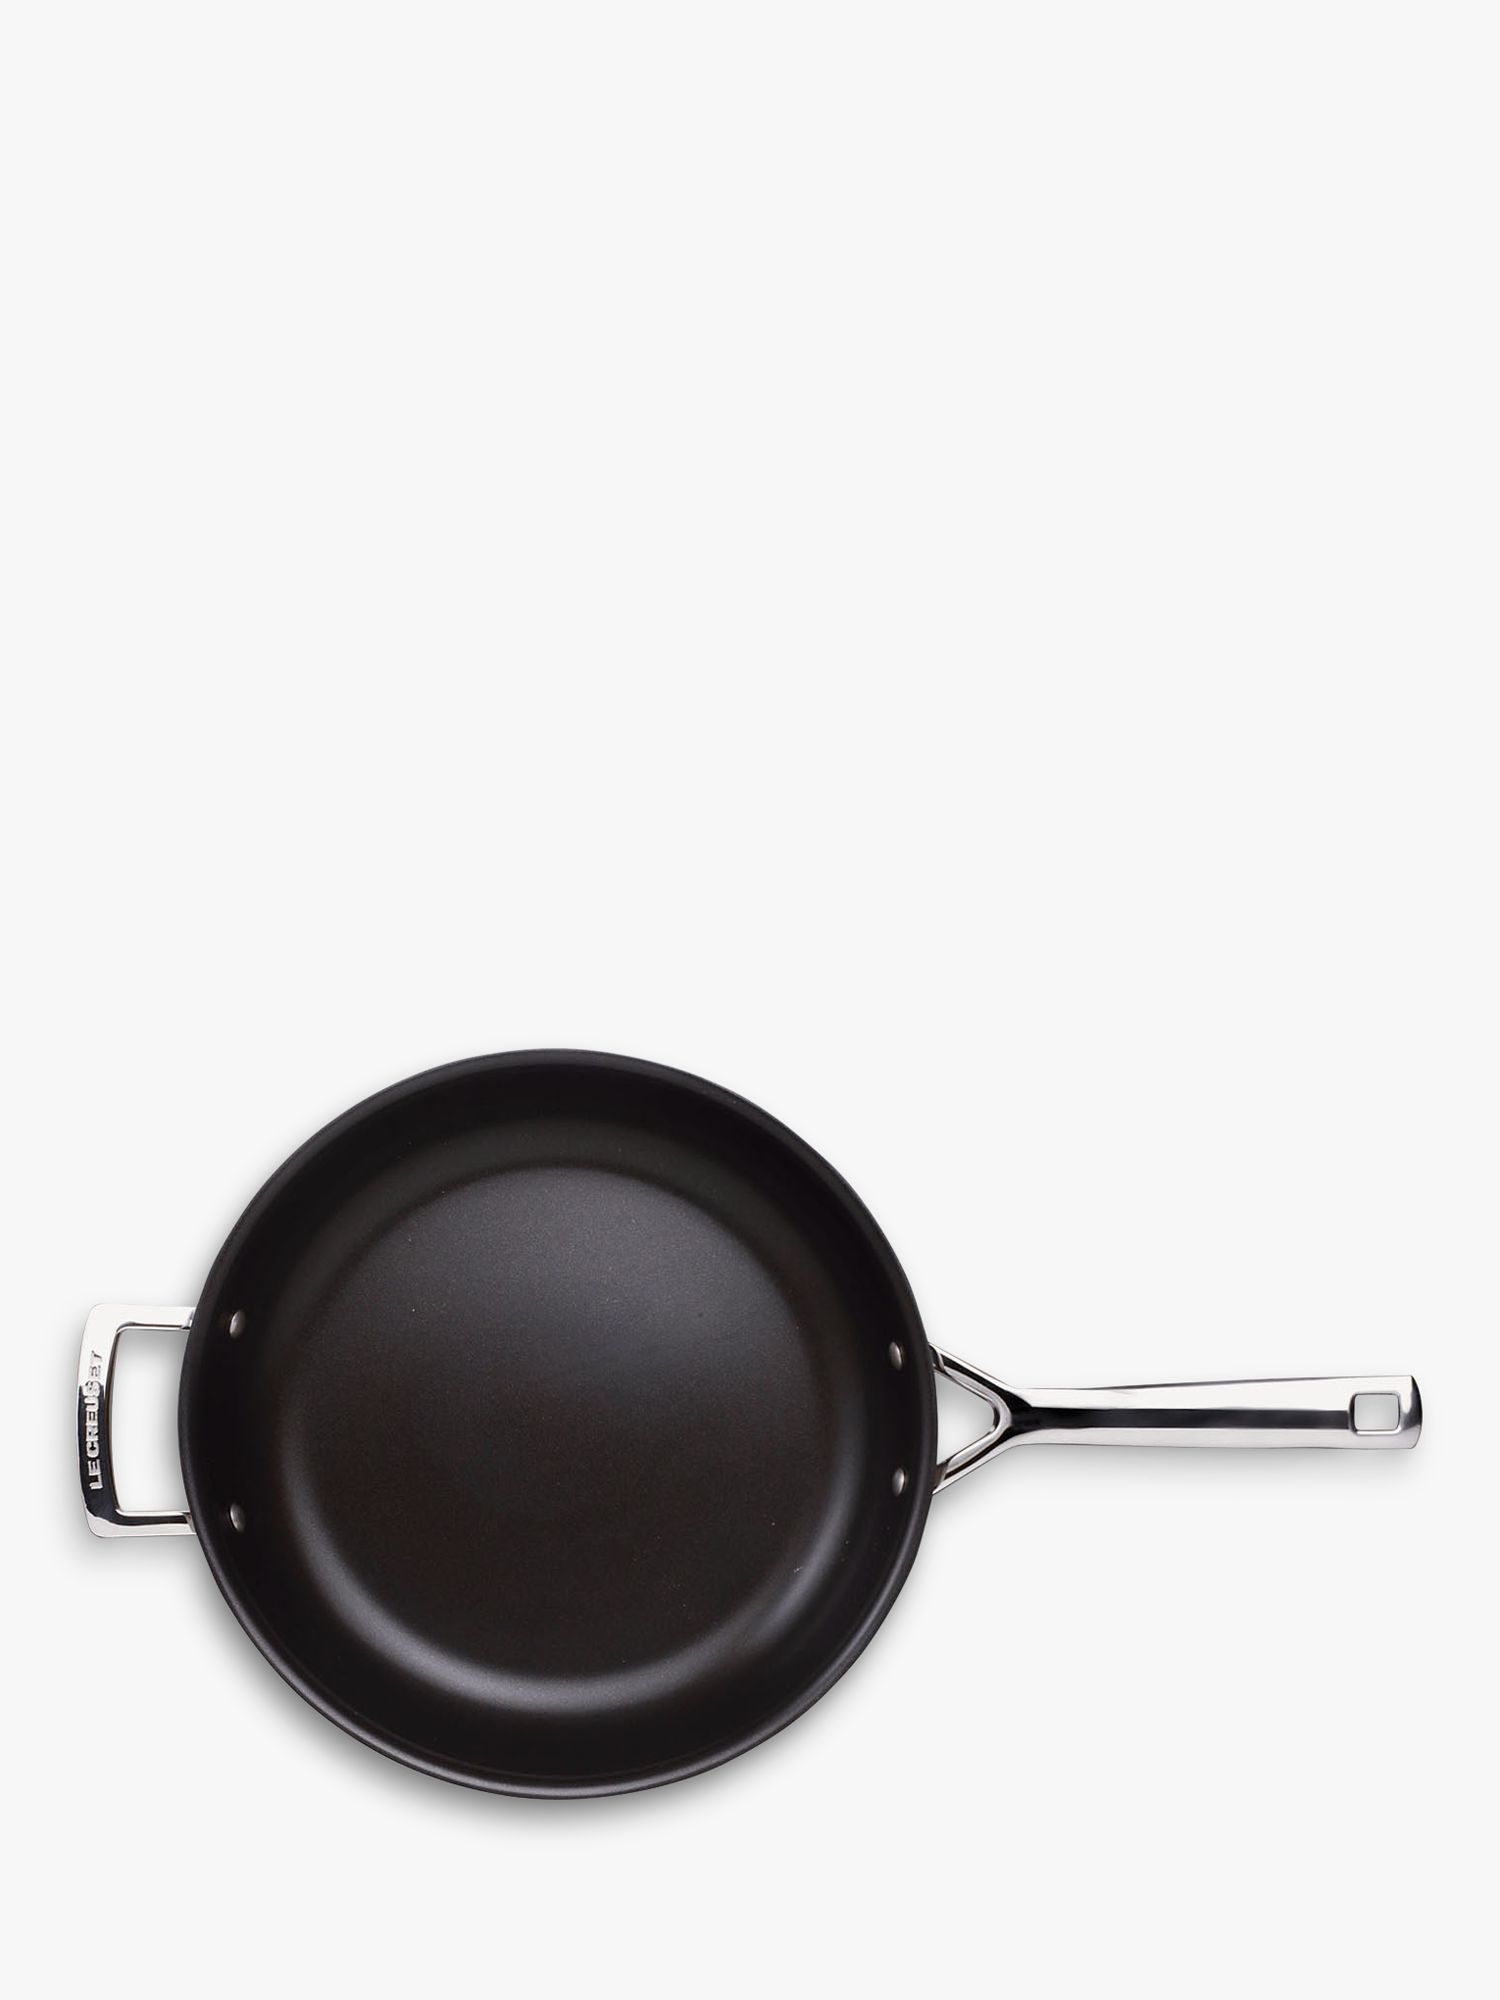 Le Creuset 3-Ply Stainless Steel 24cm Non-stick Frying Pan review